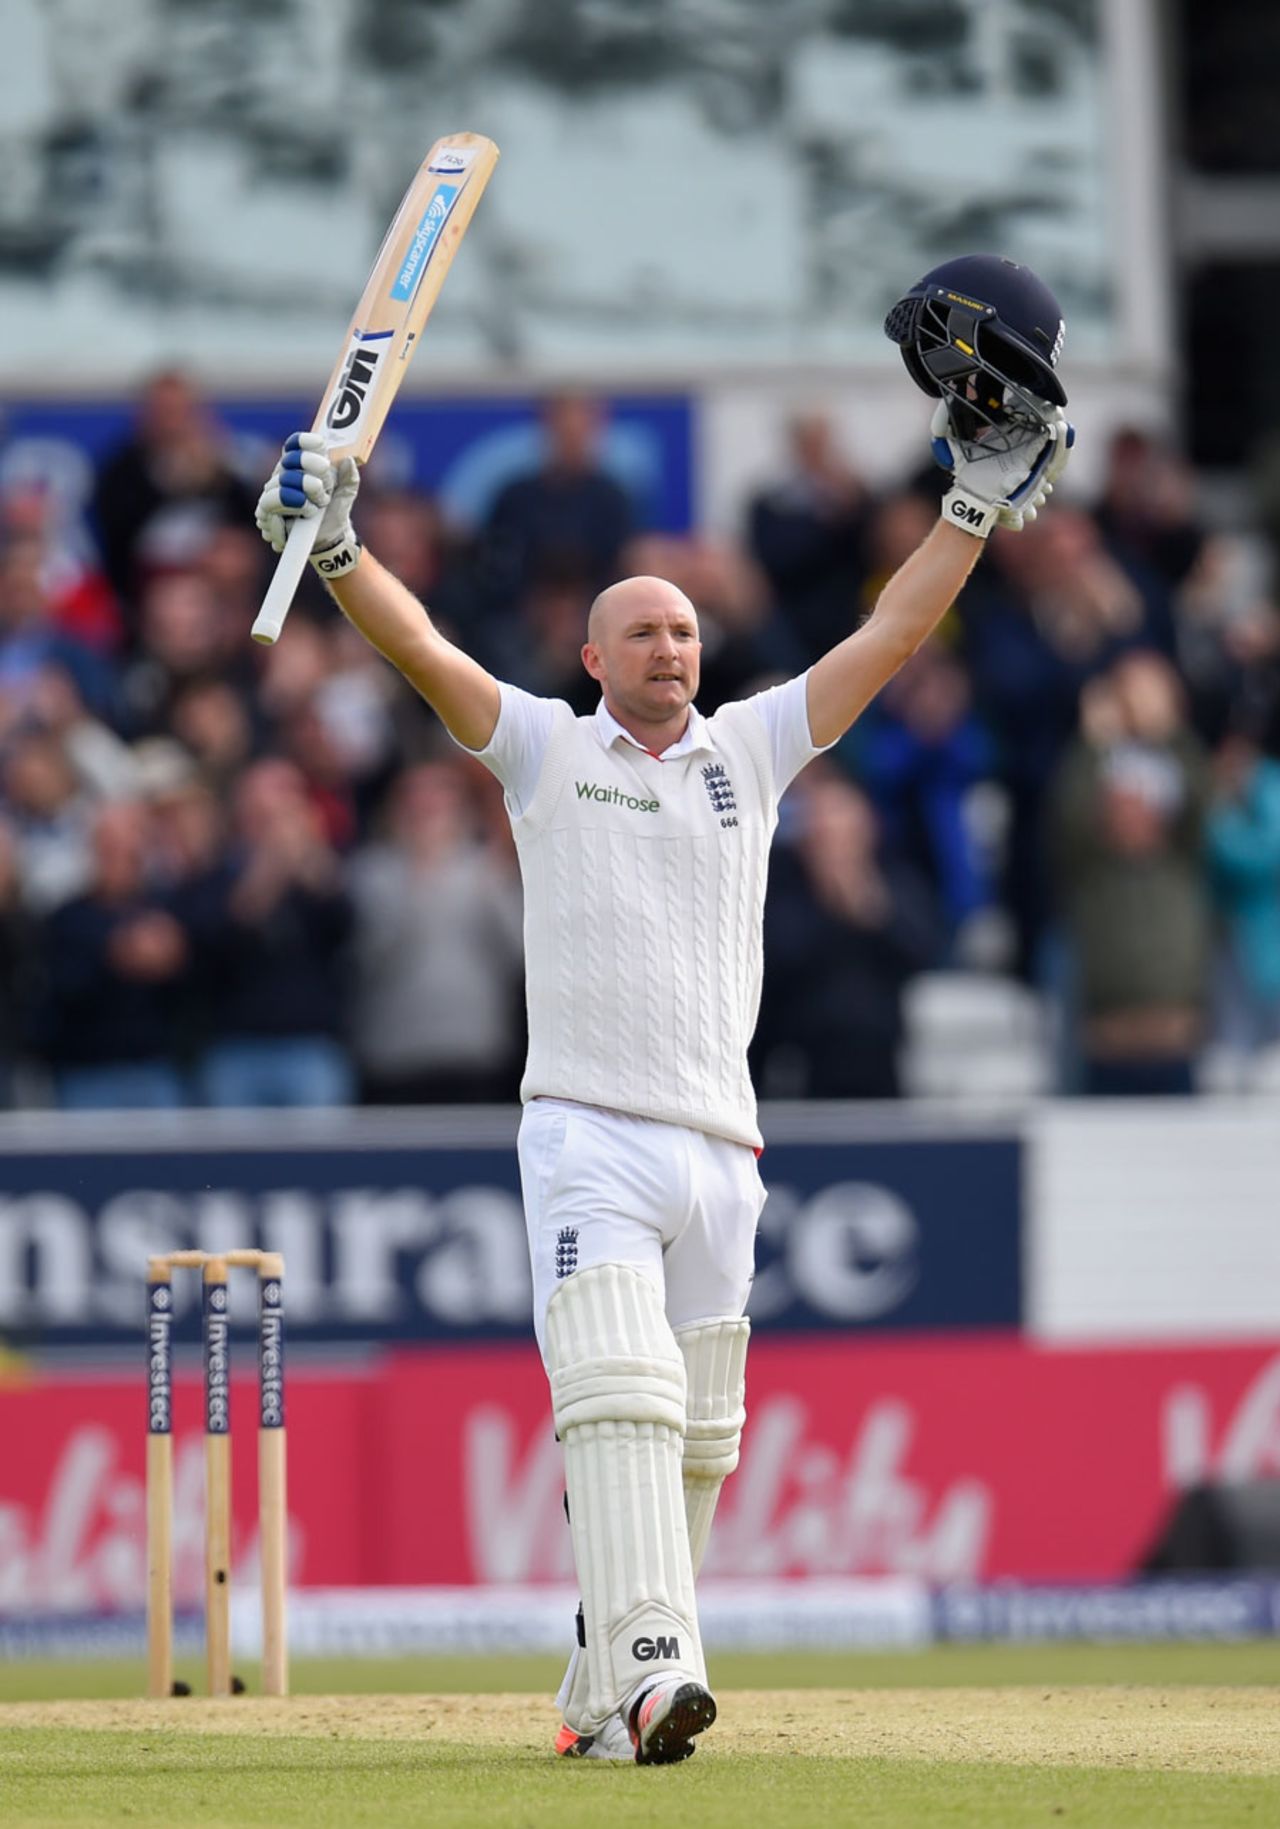 Adam Lyth soaks up the support of his home crowd, England v New Zealand, 2nd Investec Test, Headingley, 2nd day, May 30, 2015